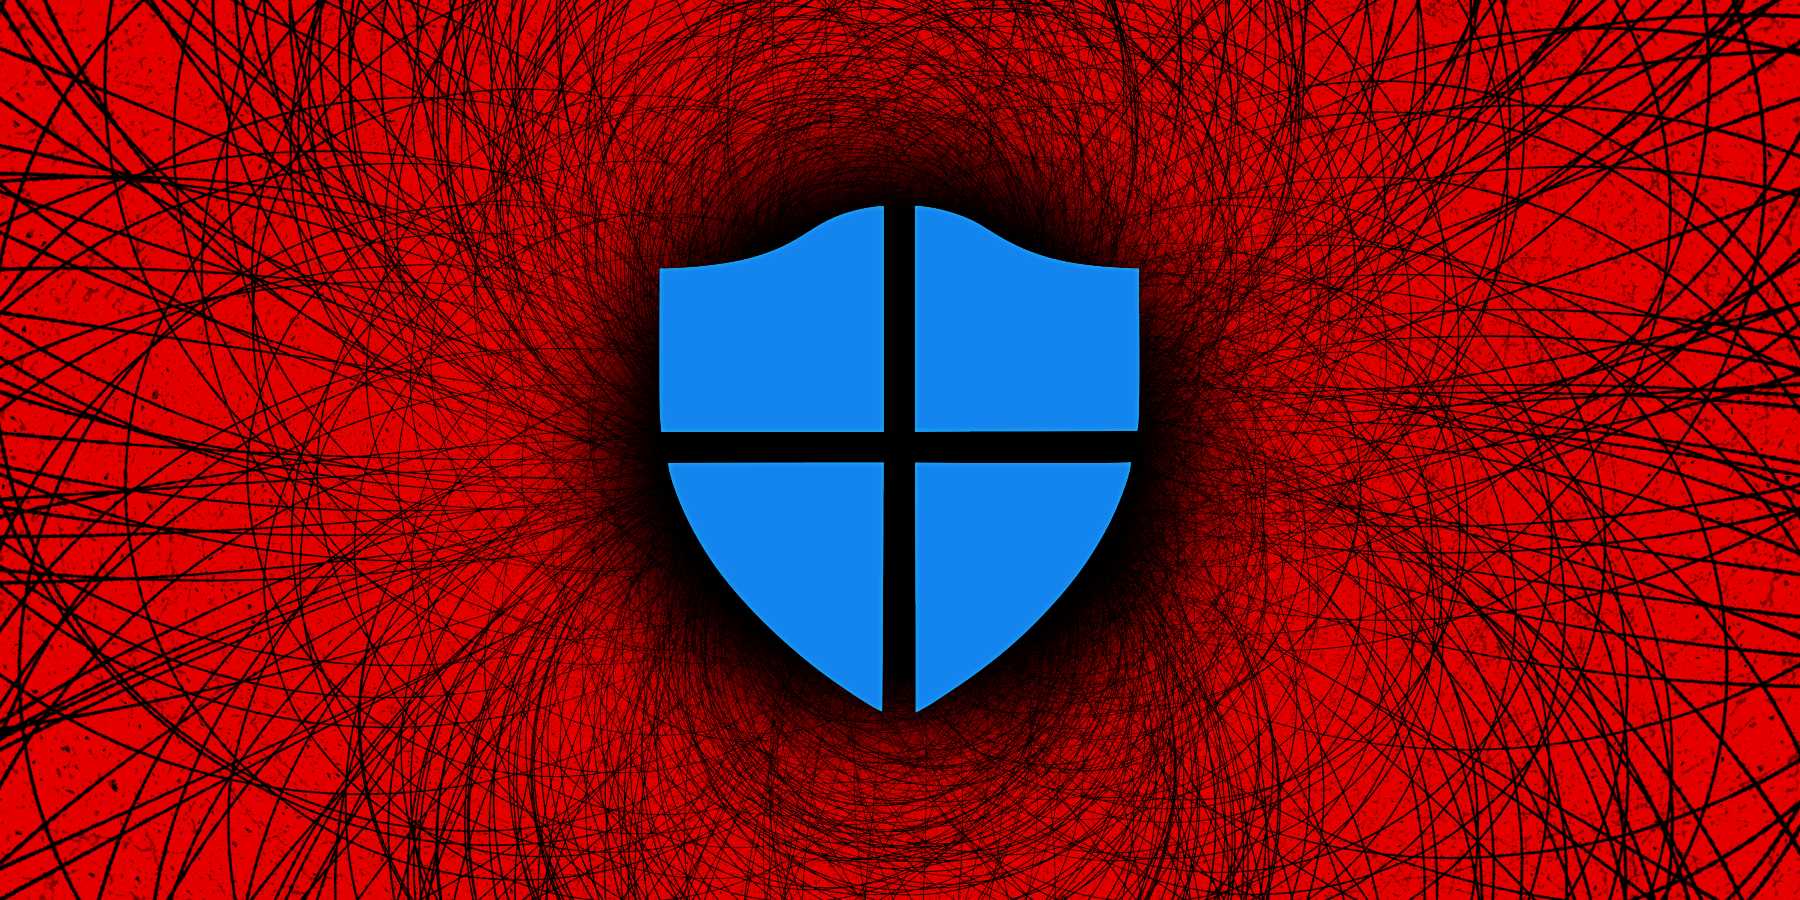 Microsoft Defender falsely detects Win32/Hive.ZY in Google Chrome, Electron apps